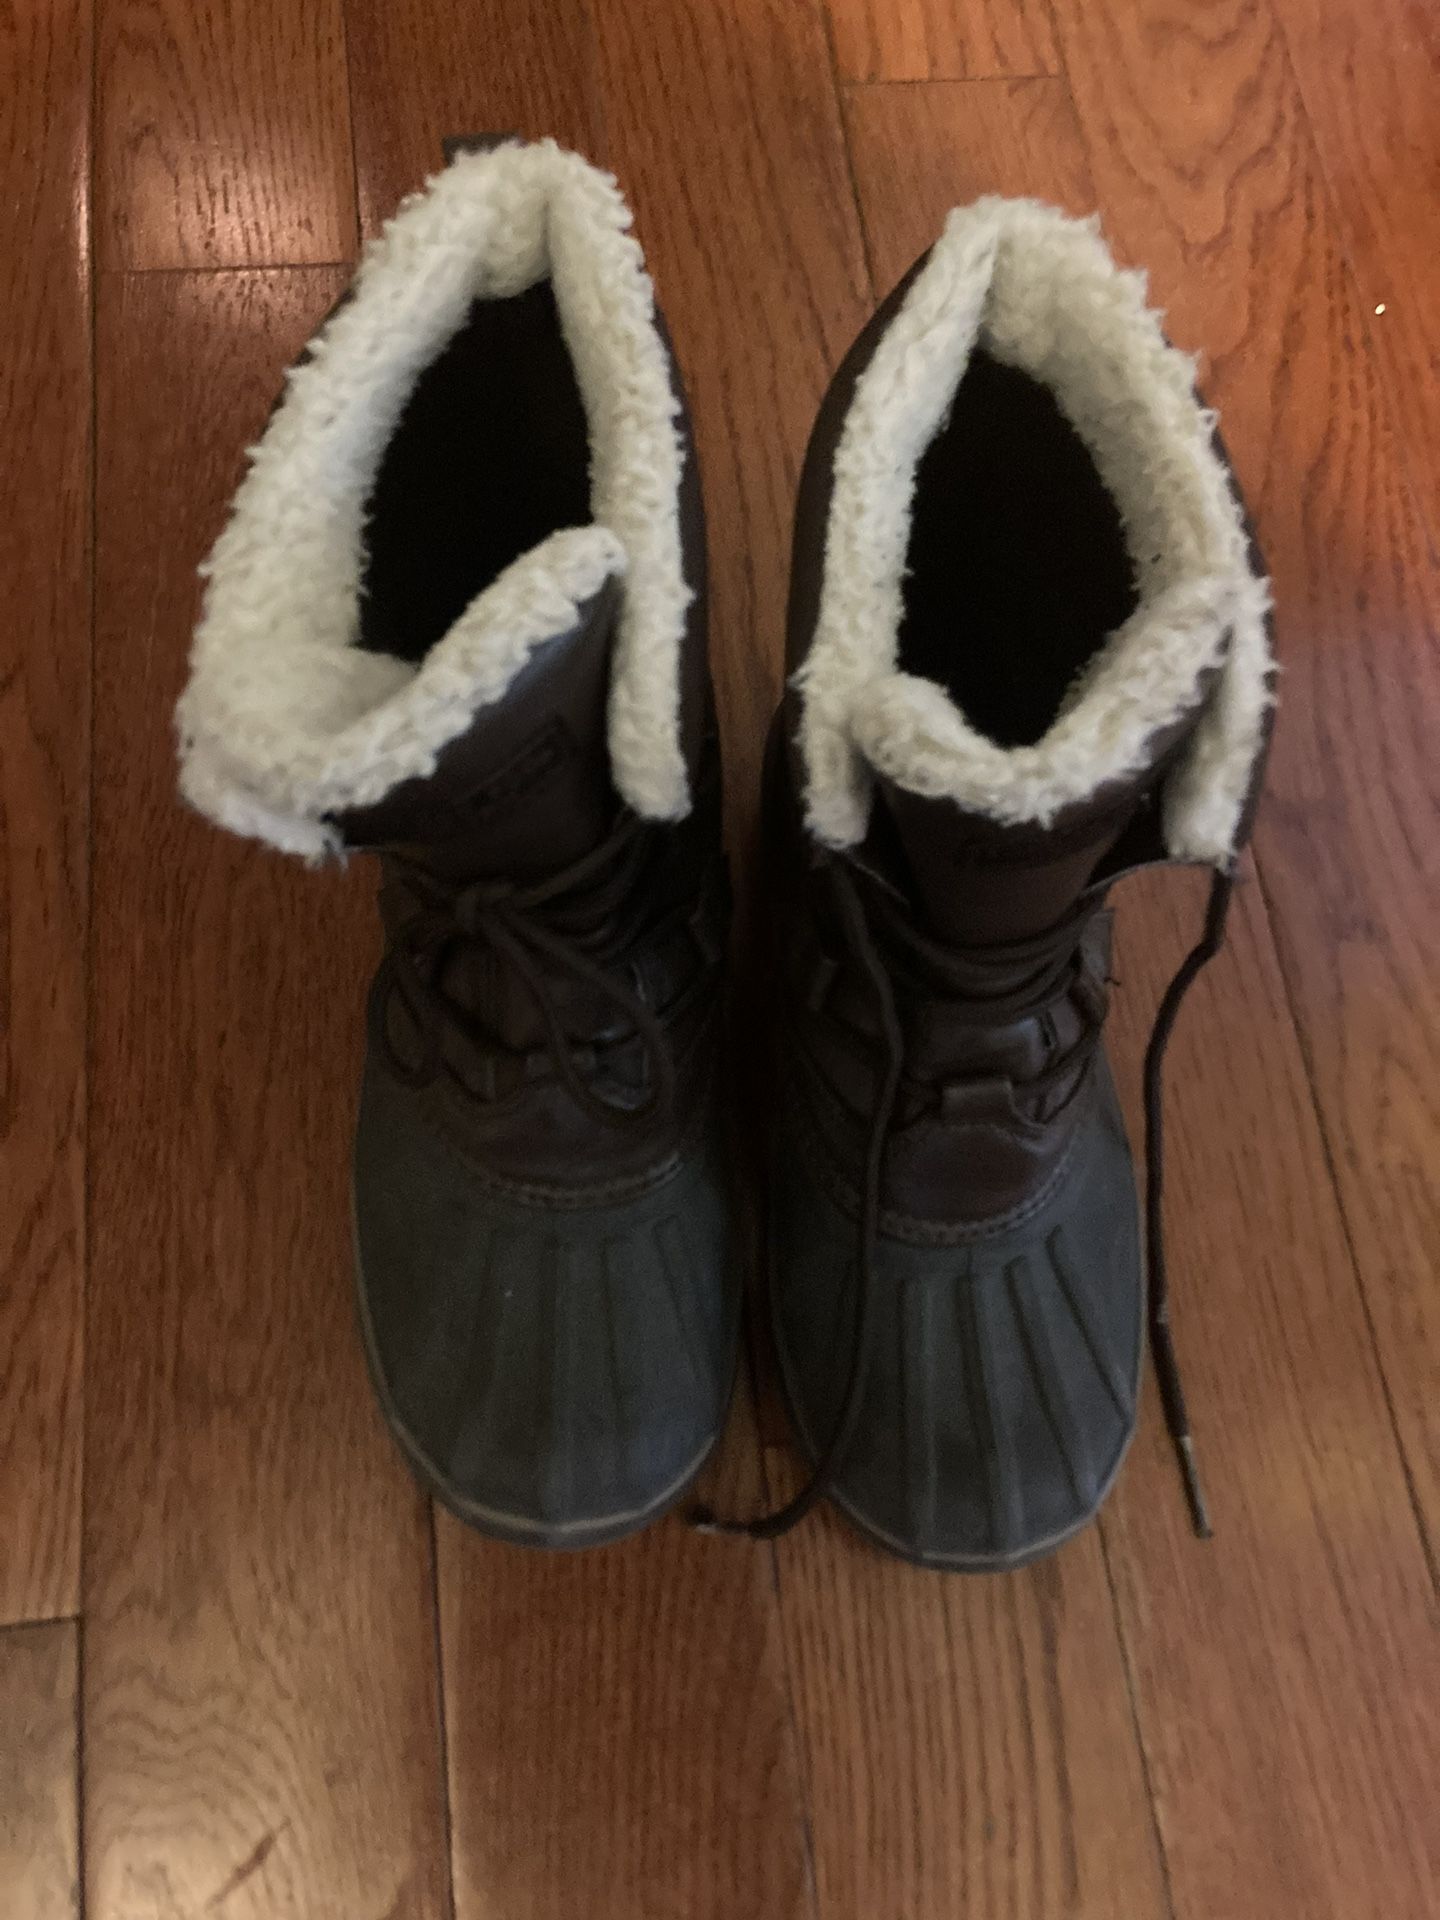 Cute snow Boots - Size 3